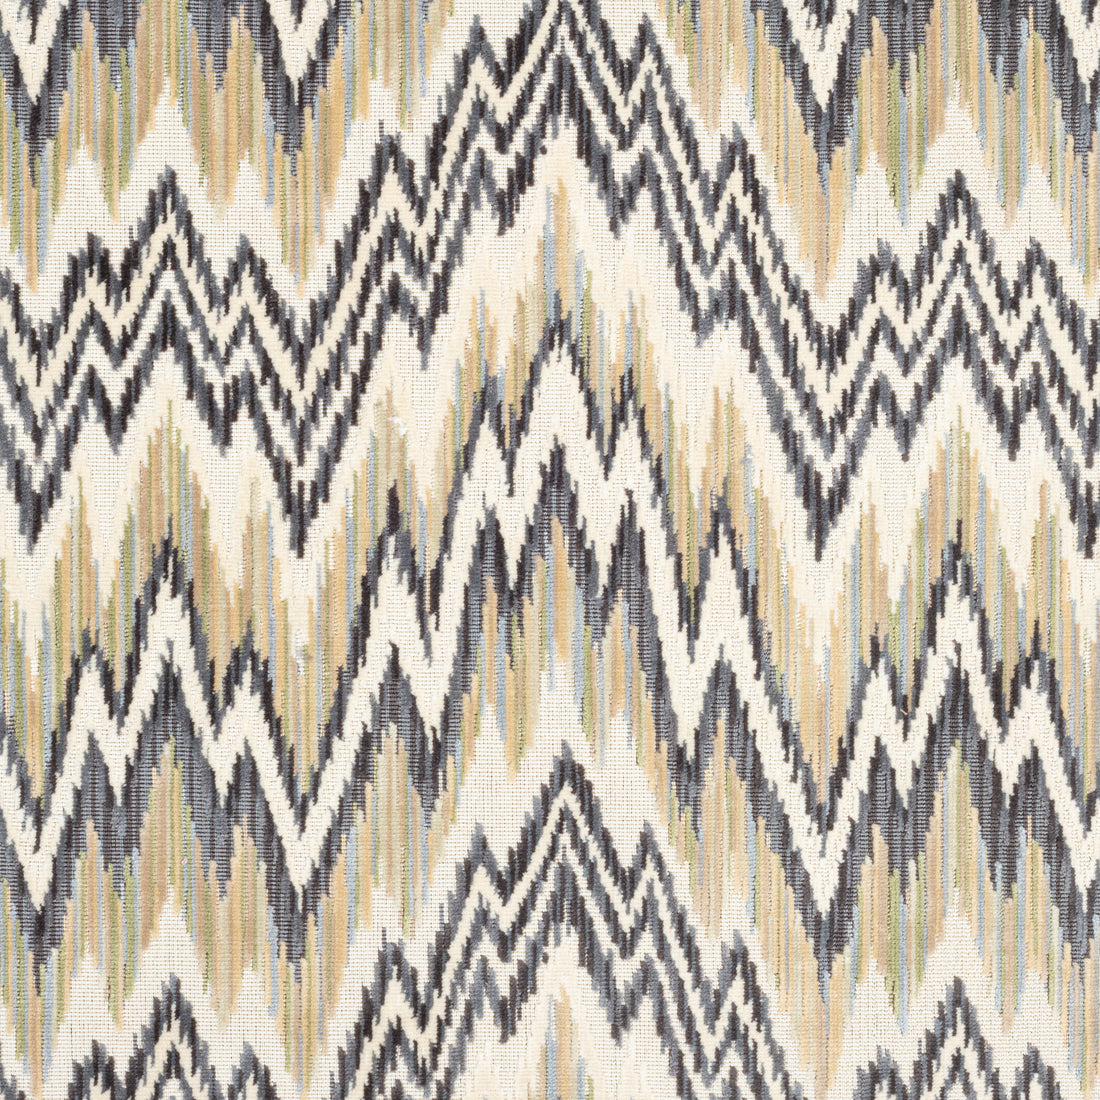 Rhythm Velvet fabric in grain and charcoal color - pattern number W72819 - by Thibaut in the Woven Resource 13: Fusion Velvets collection